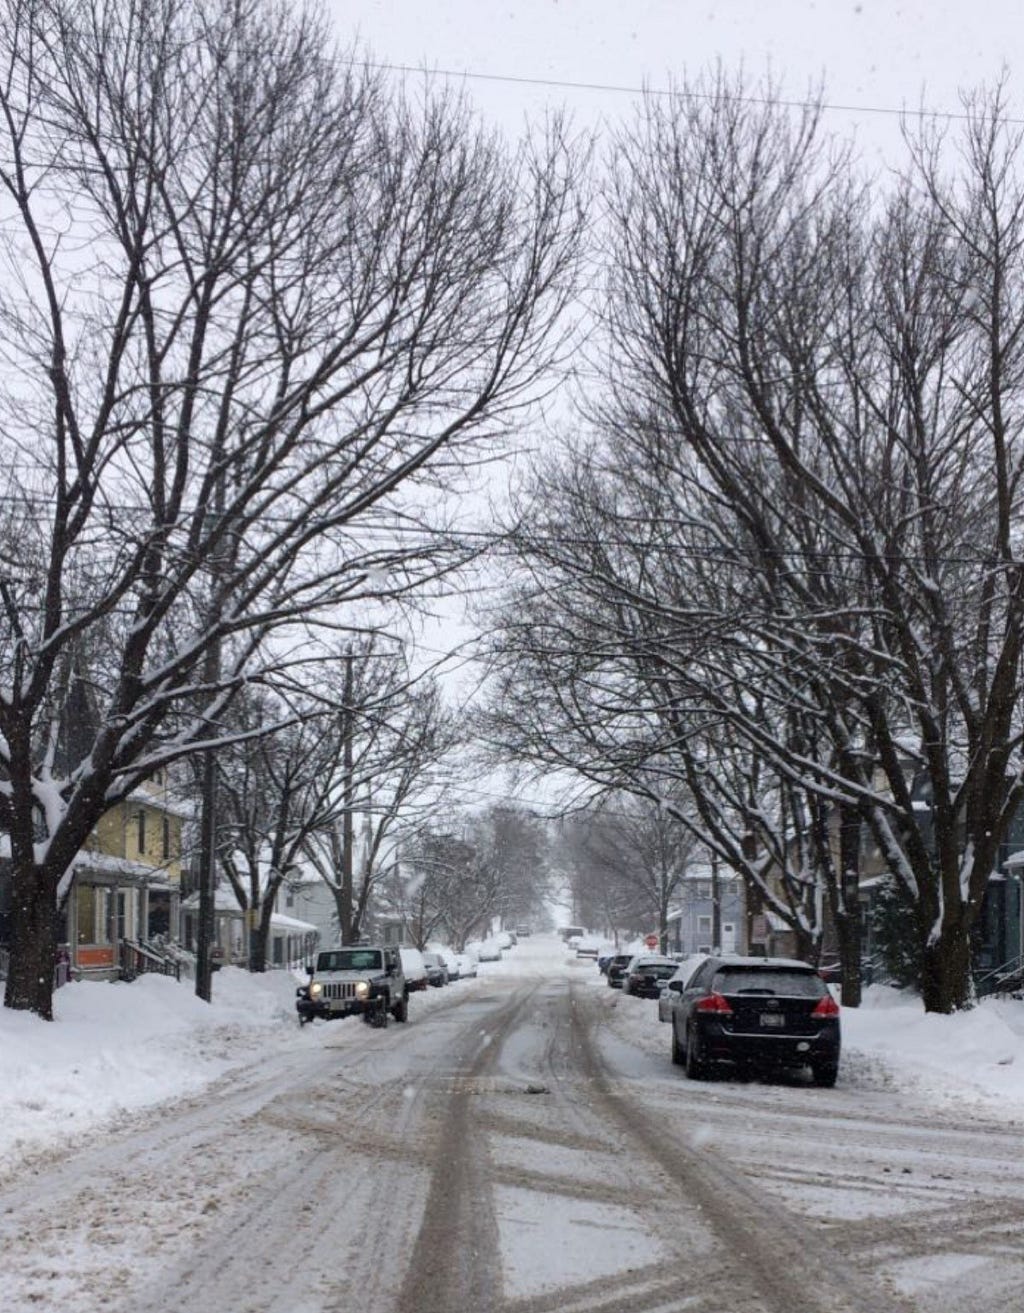 A snowy street lined with parked cars and trees